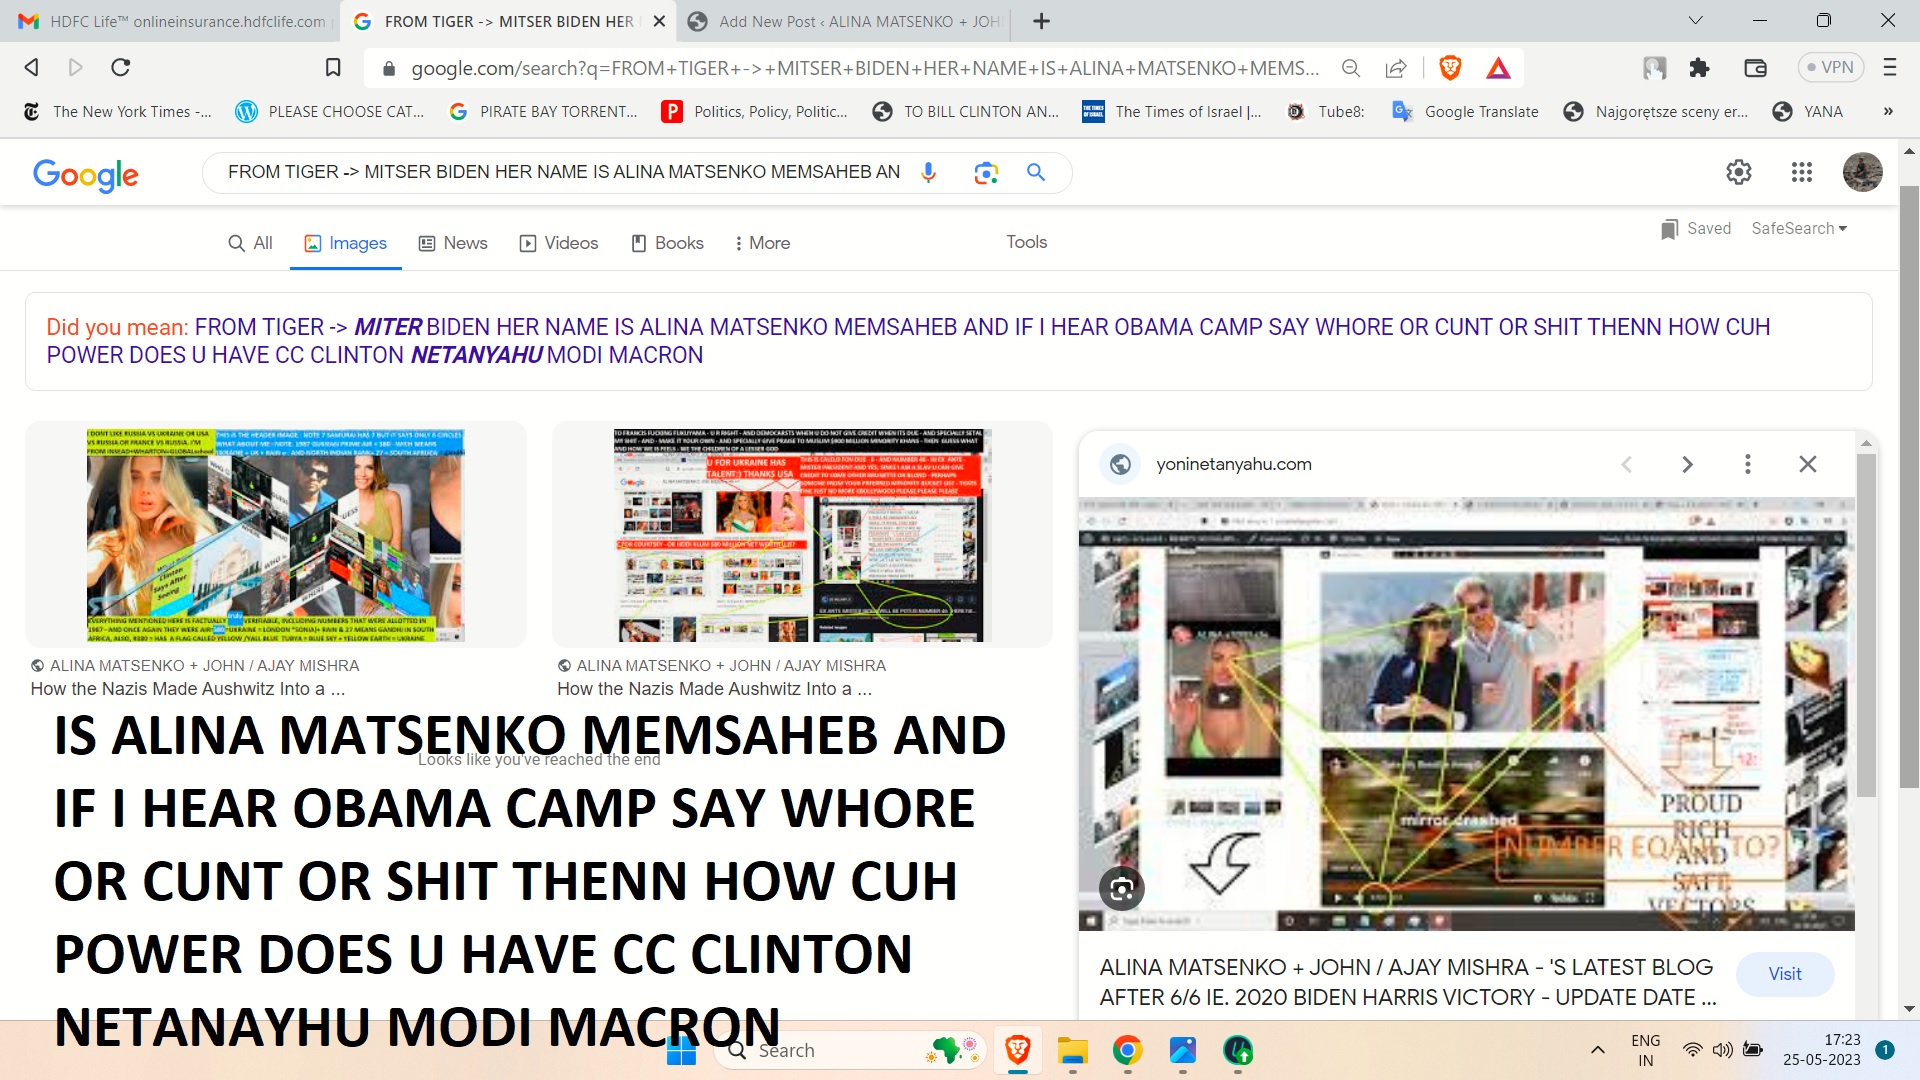 FROM TIGER MITSER BIDEN HER NAME IS ALINA MATSENKO MEMSAHEB AND IF I HEAR OBAMA CAMP SAY WHORE OR CUNT OR SHIT THENN HOW CUH POWER DOES U HAVE CC CLINTON NETANAYHU MODI MACRON